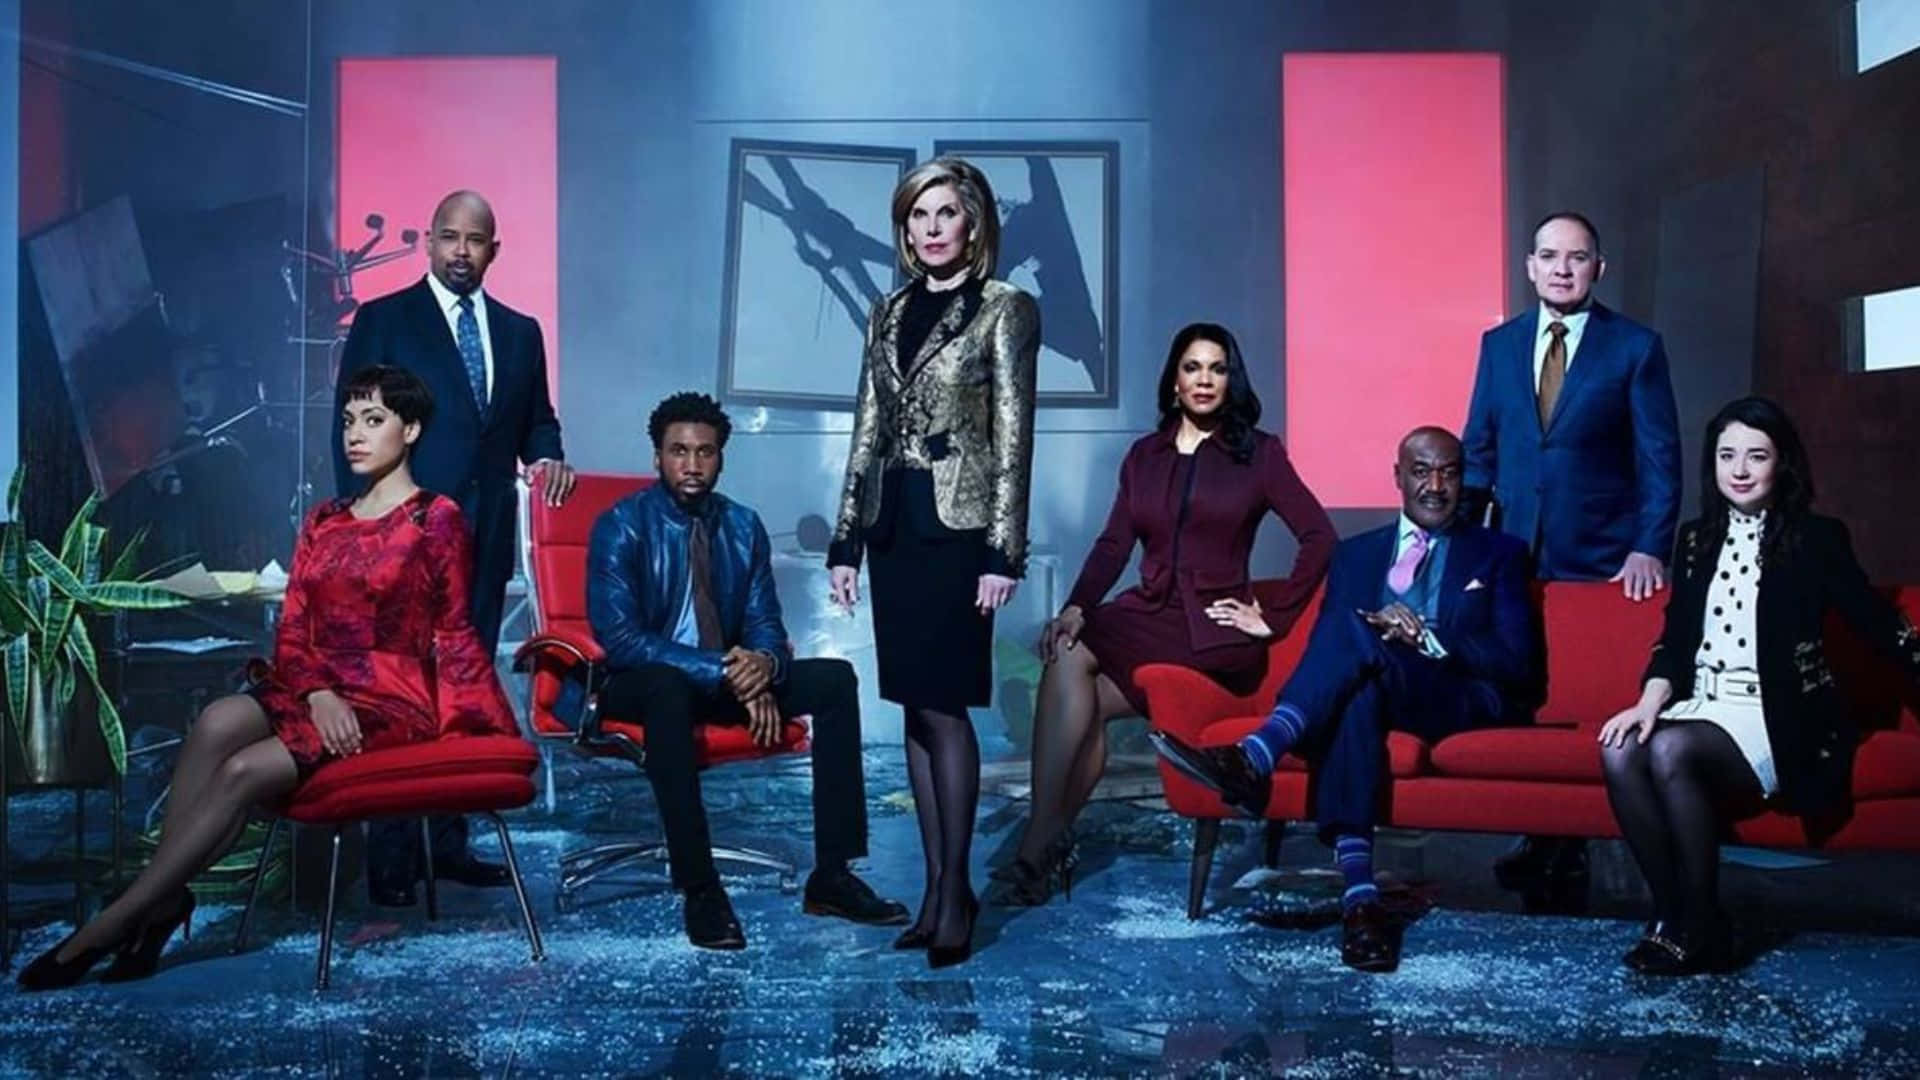 The Good Fight Cast Promotional Photo Wallpaper